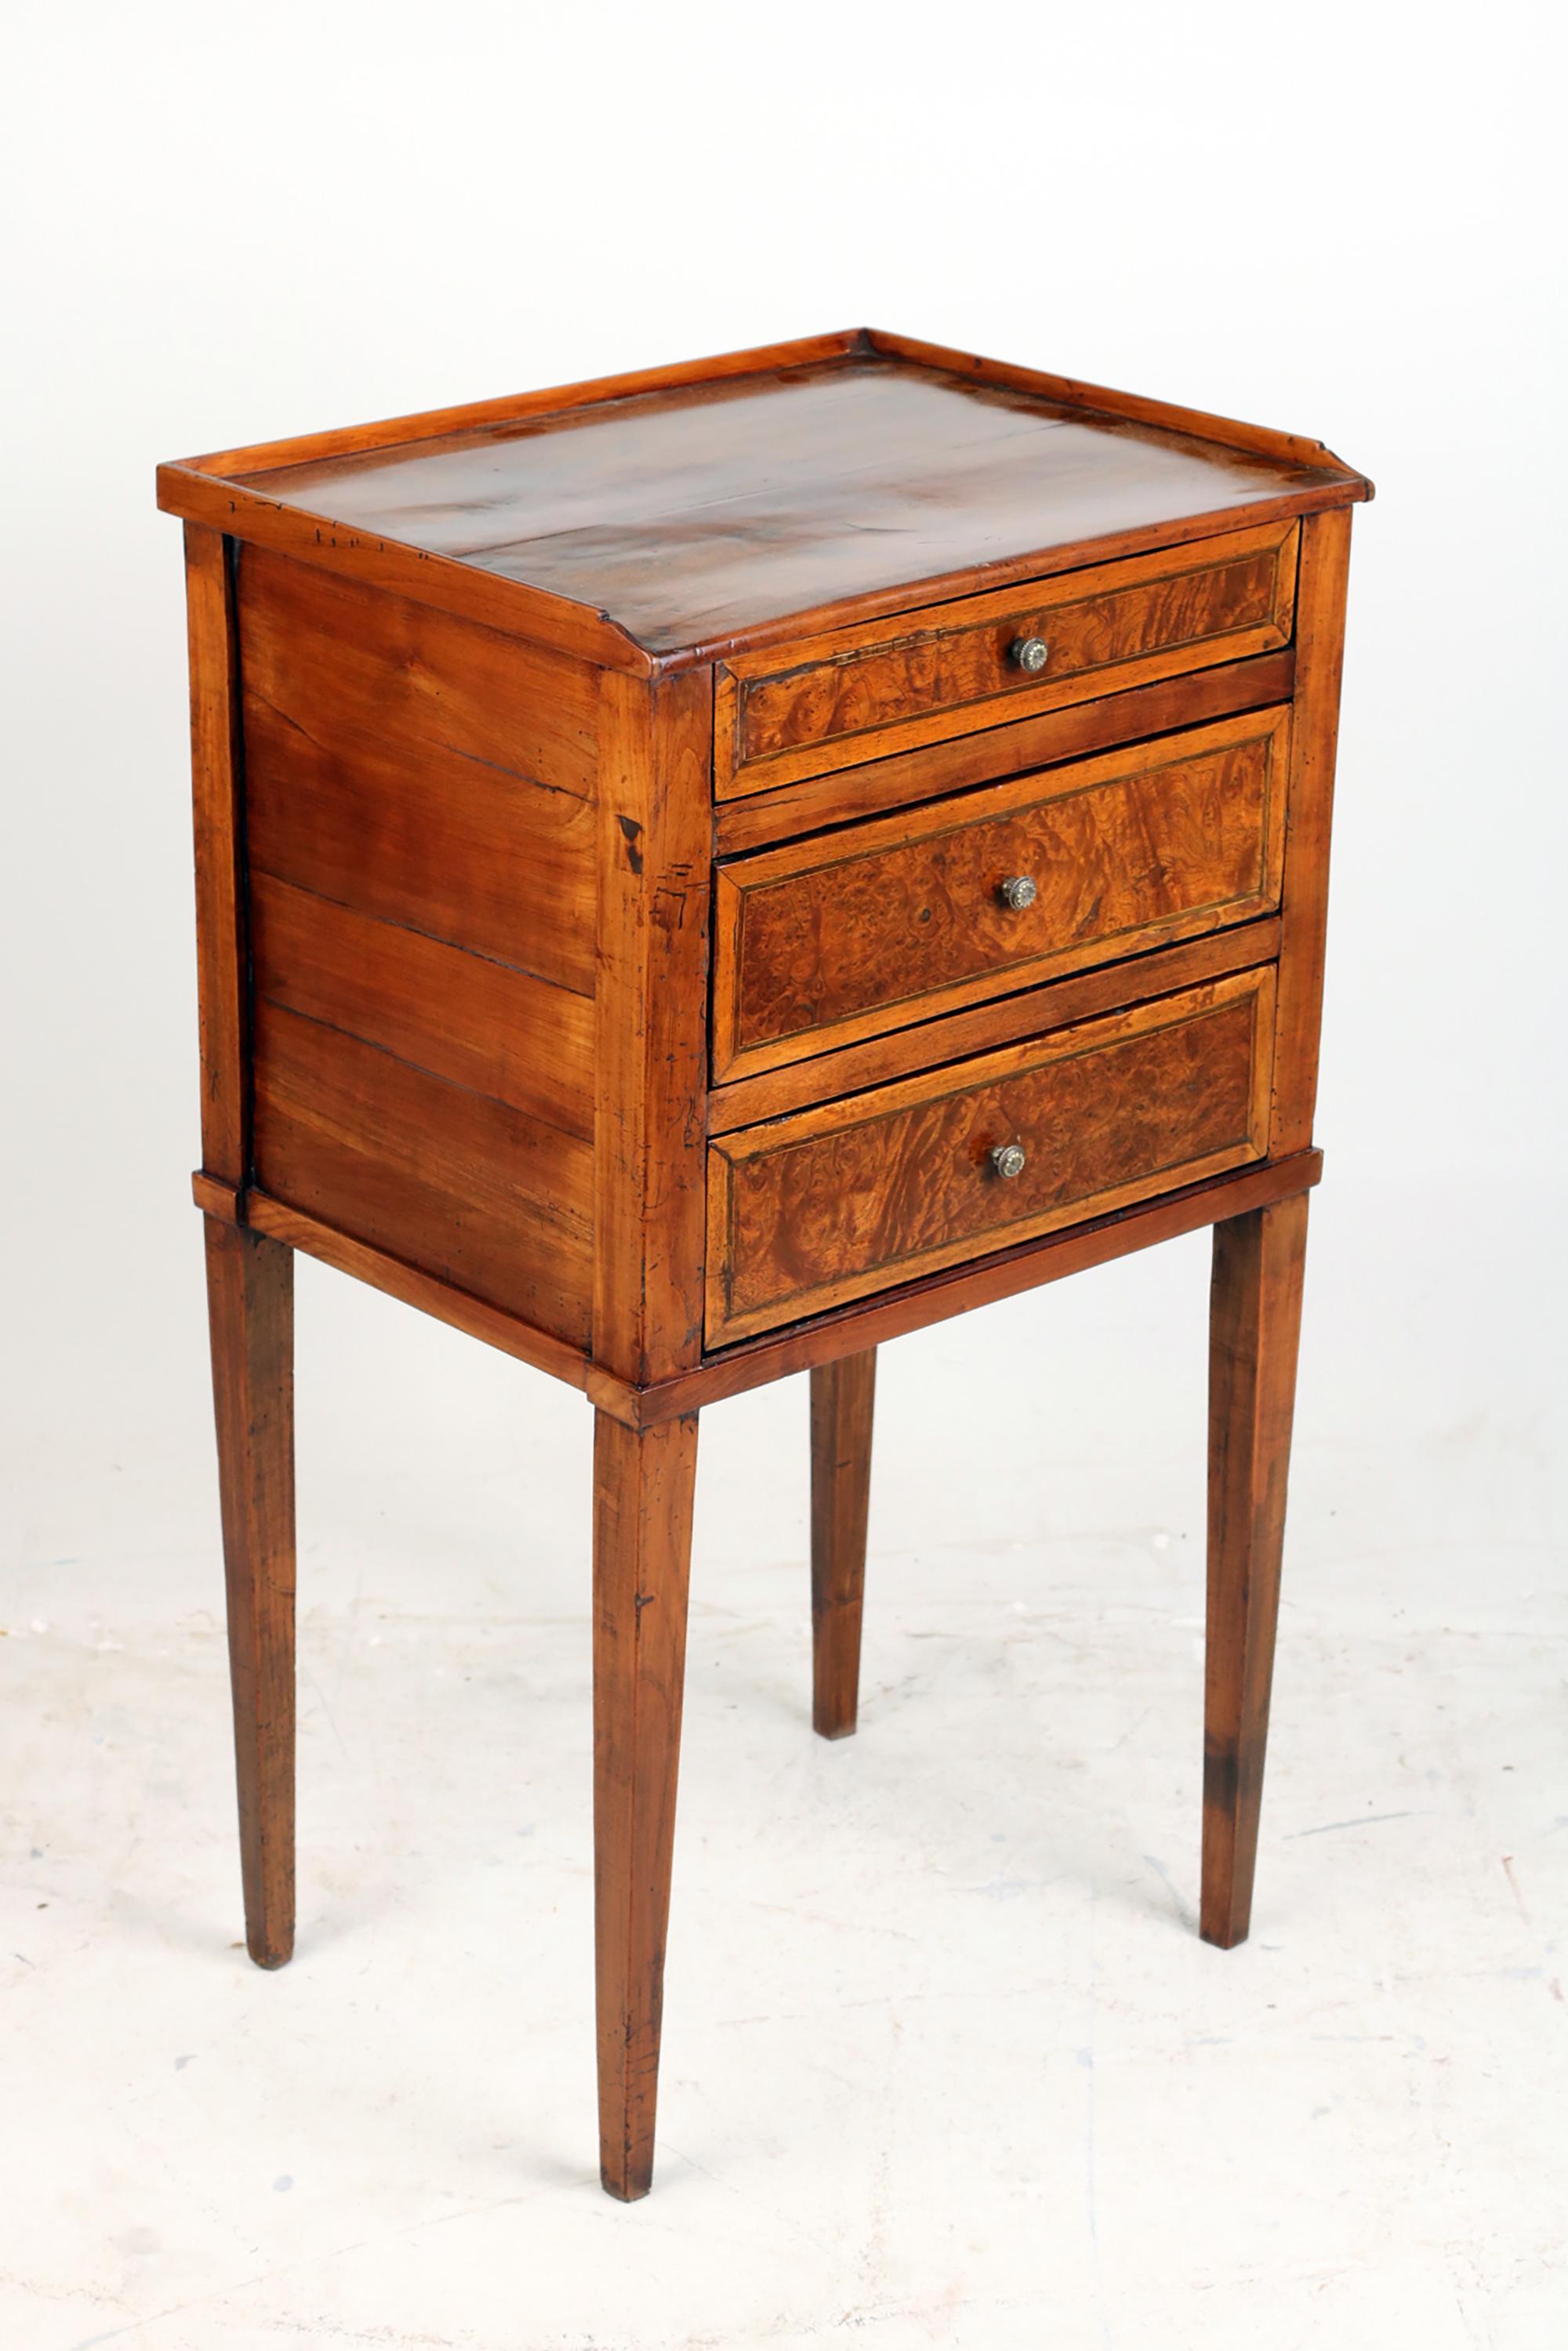 Antique Side Table,
France, Ca.1870

Beautiful french small piece of furniture made of solid cherrywood. The fronts of drawers decorated with inlays and burl birch. The furniture had been restored by a profesional furniture restorer. The original